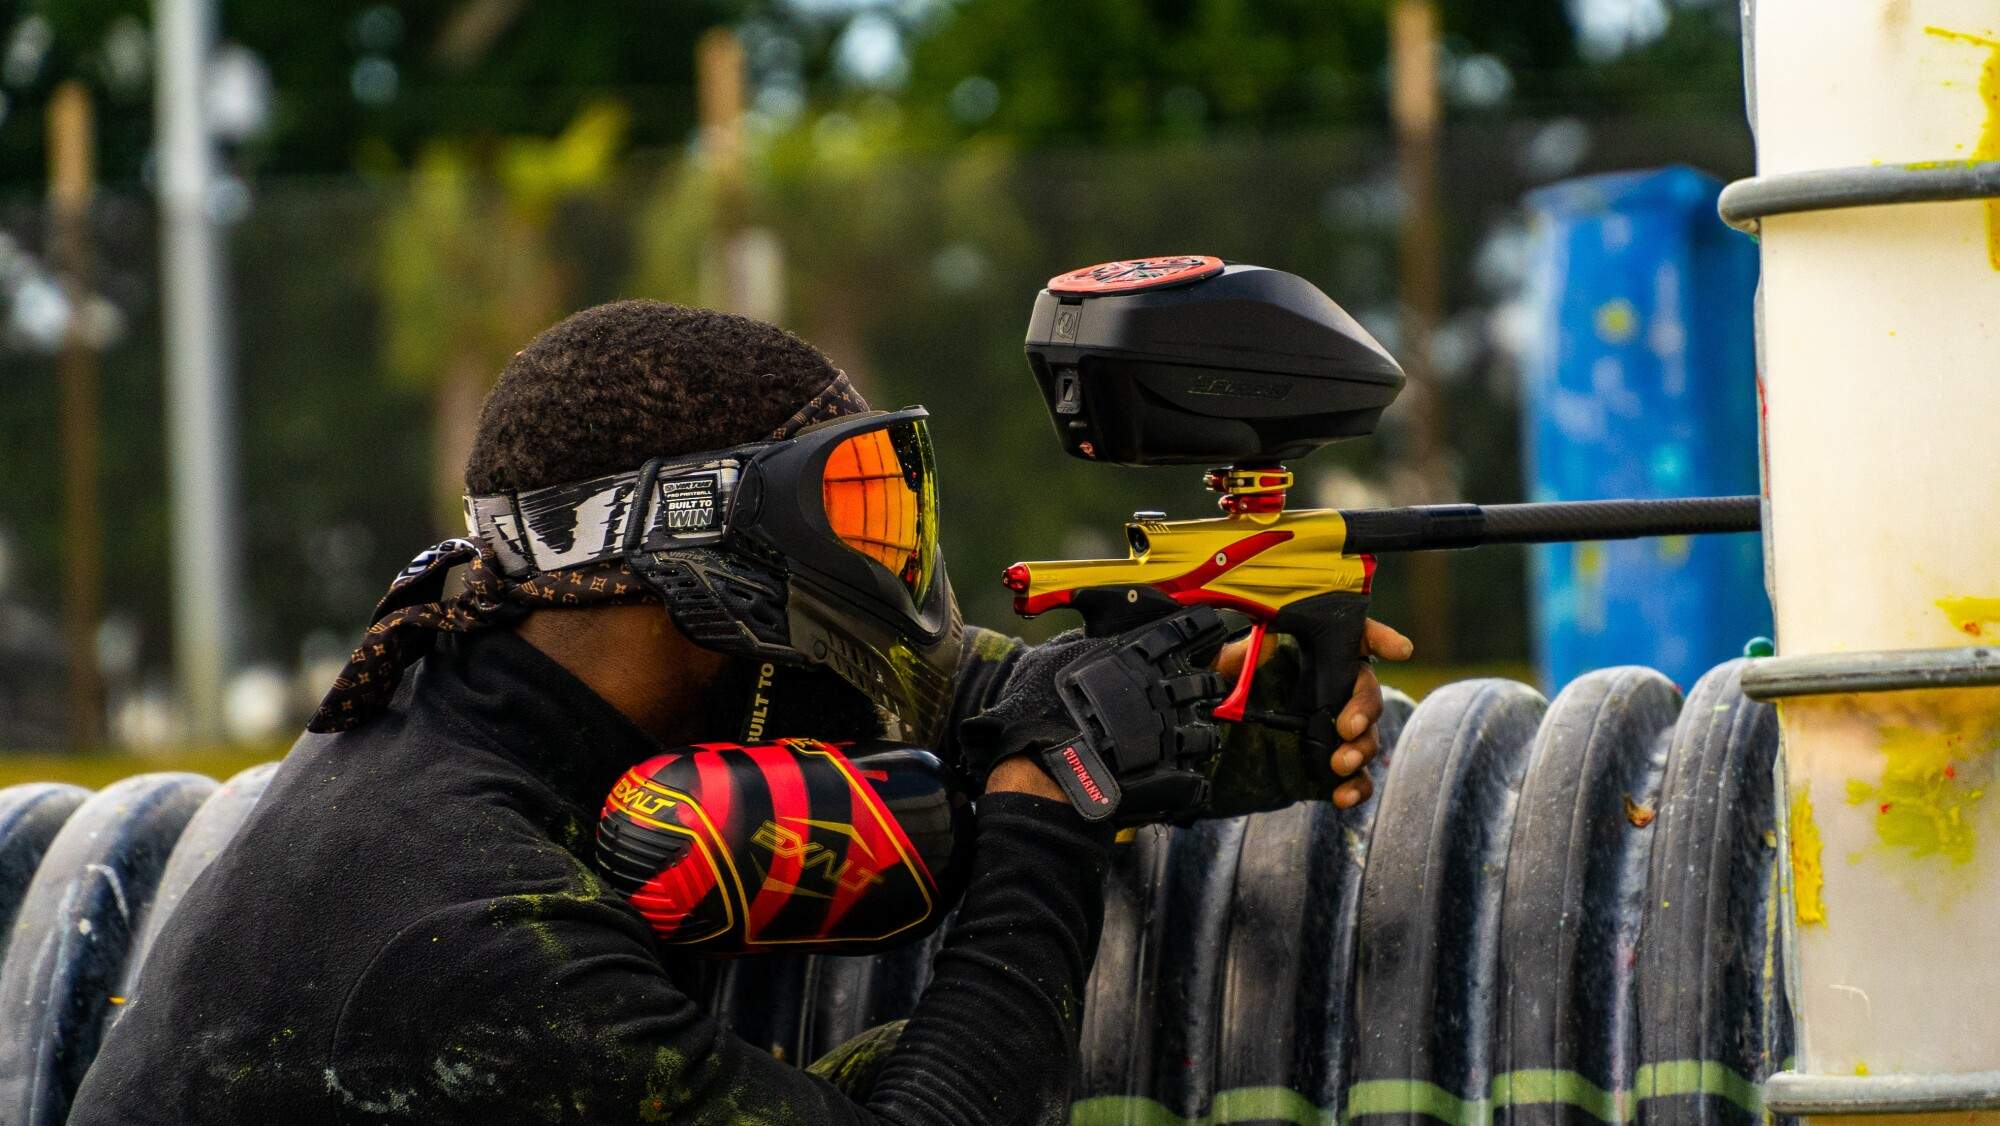 Paintball Gear: What Equipment Do You Need For Paintball?